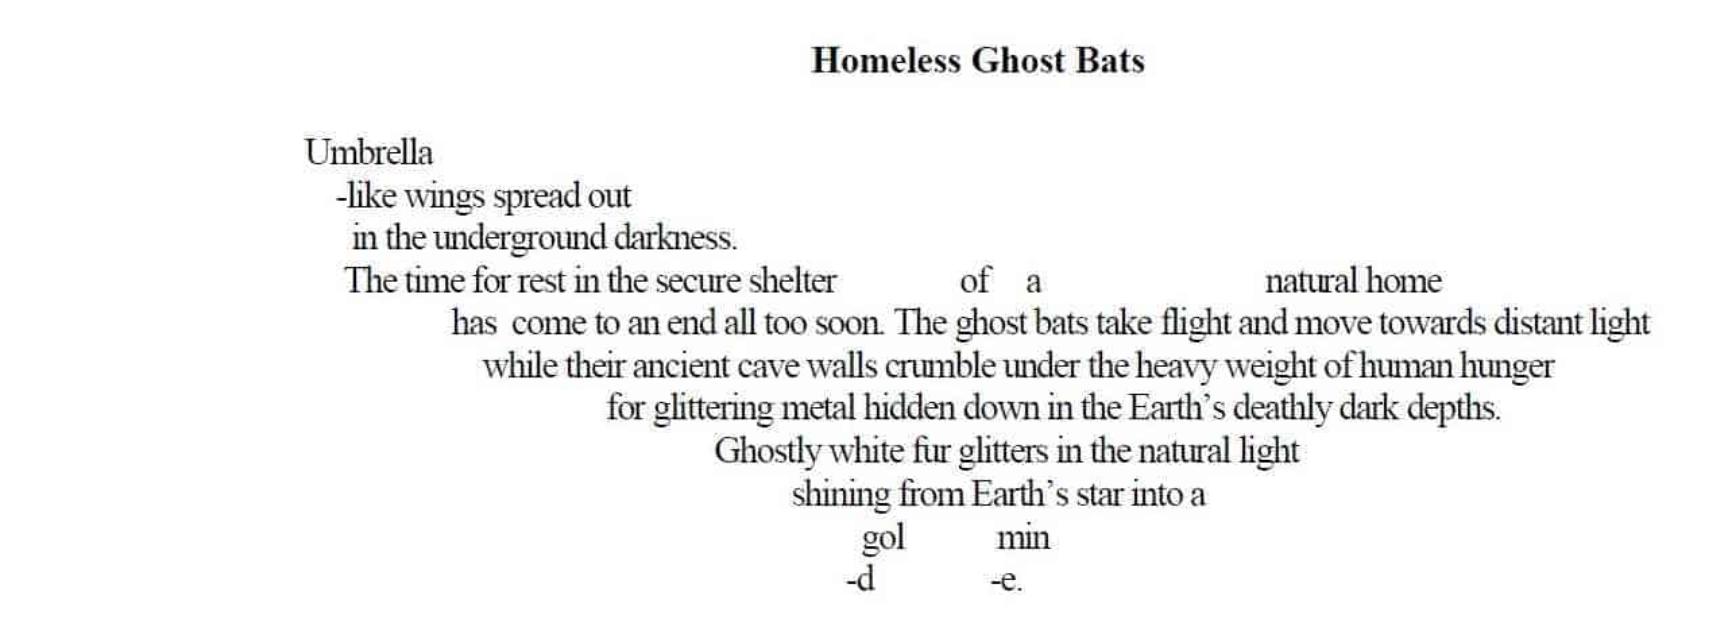 Homeless Ghost Bats by Michael Leach in Spillwords